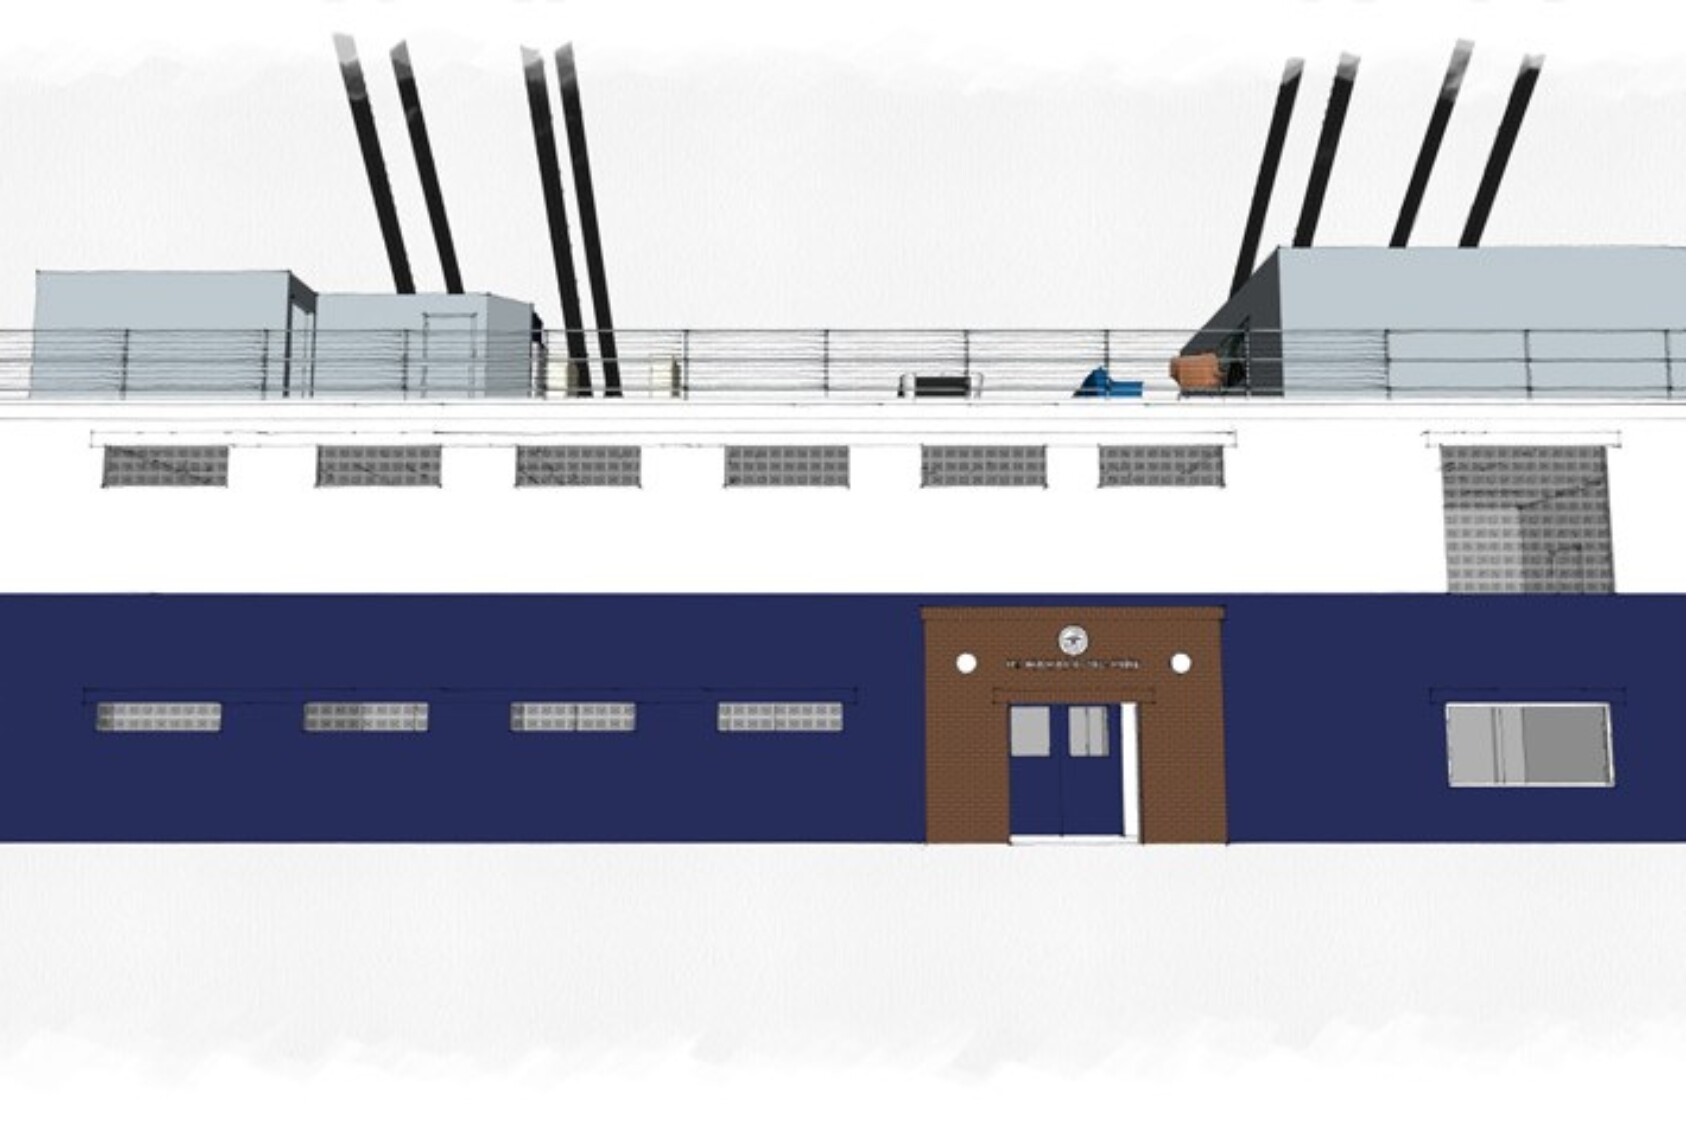 This project aims to significantly improve the Naval ROTC program's facilities in Barton Hall—called the “Topside.” The renovation will include new lockers, flooring, furniture, and railings to mimic what would be on a ship.